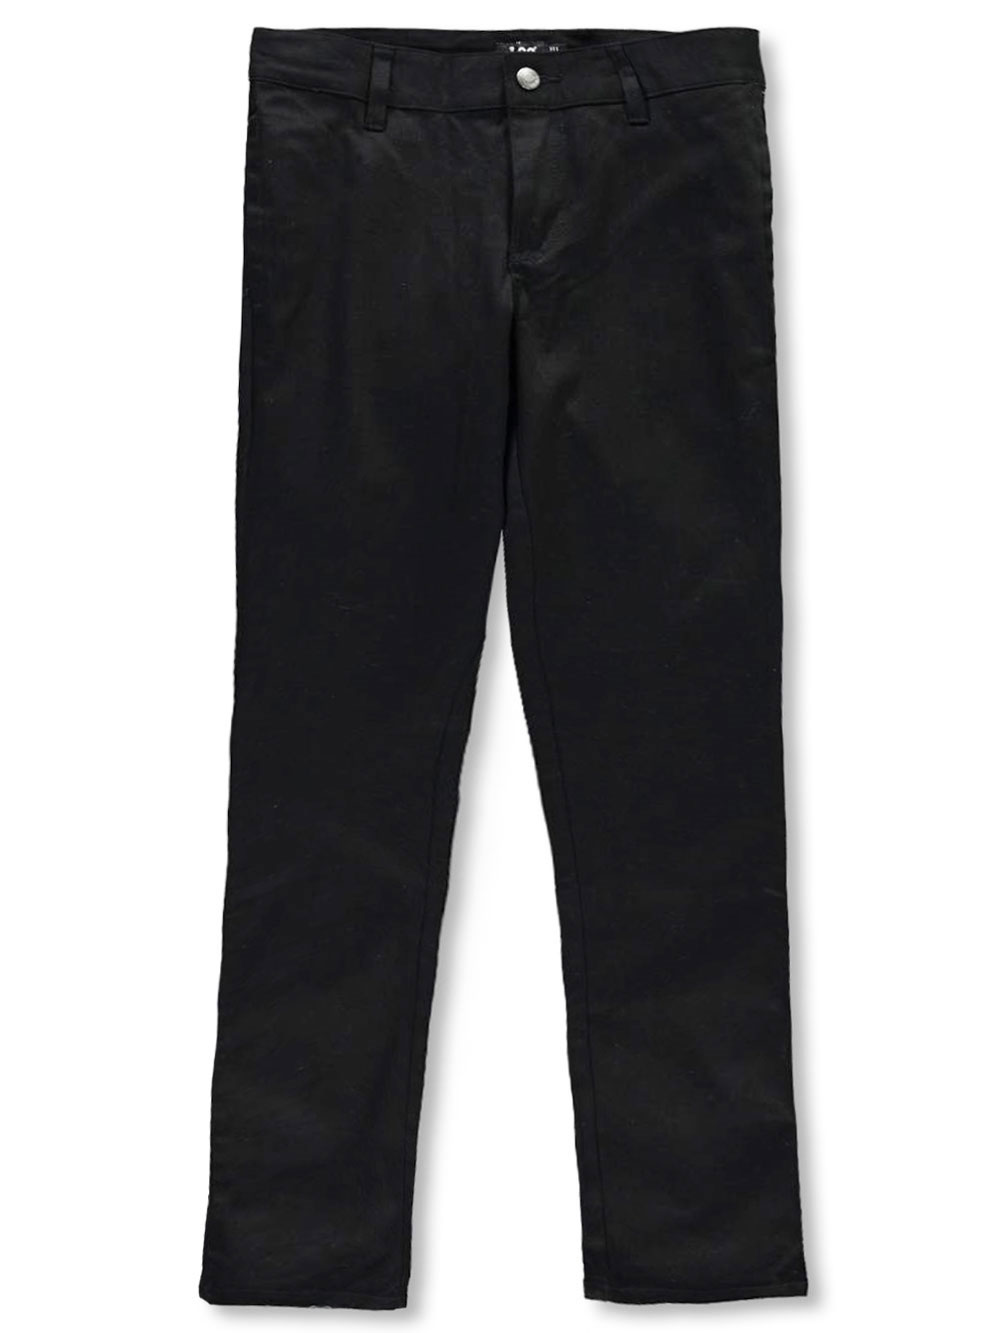 Size Junior 9 Pants for Girls